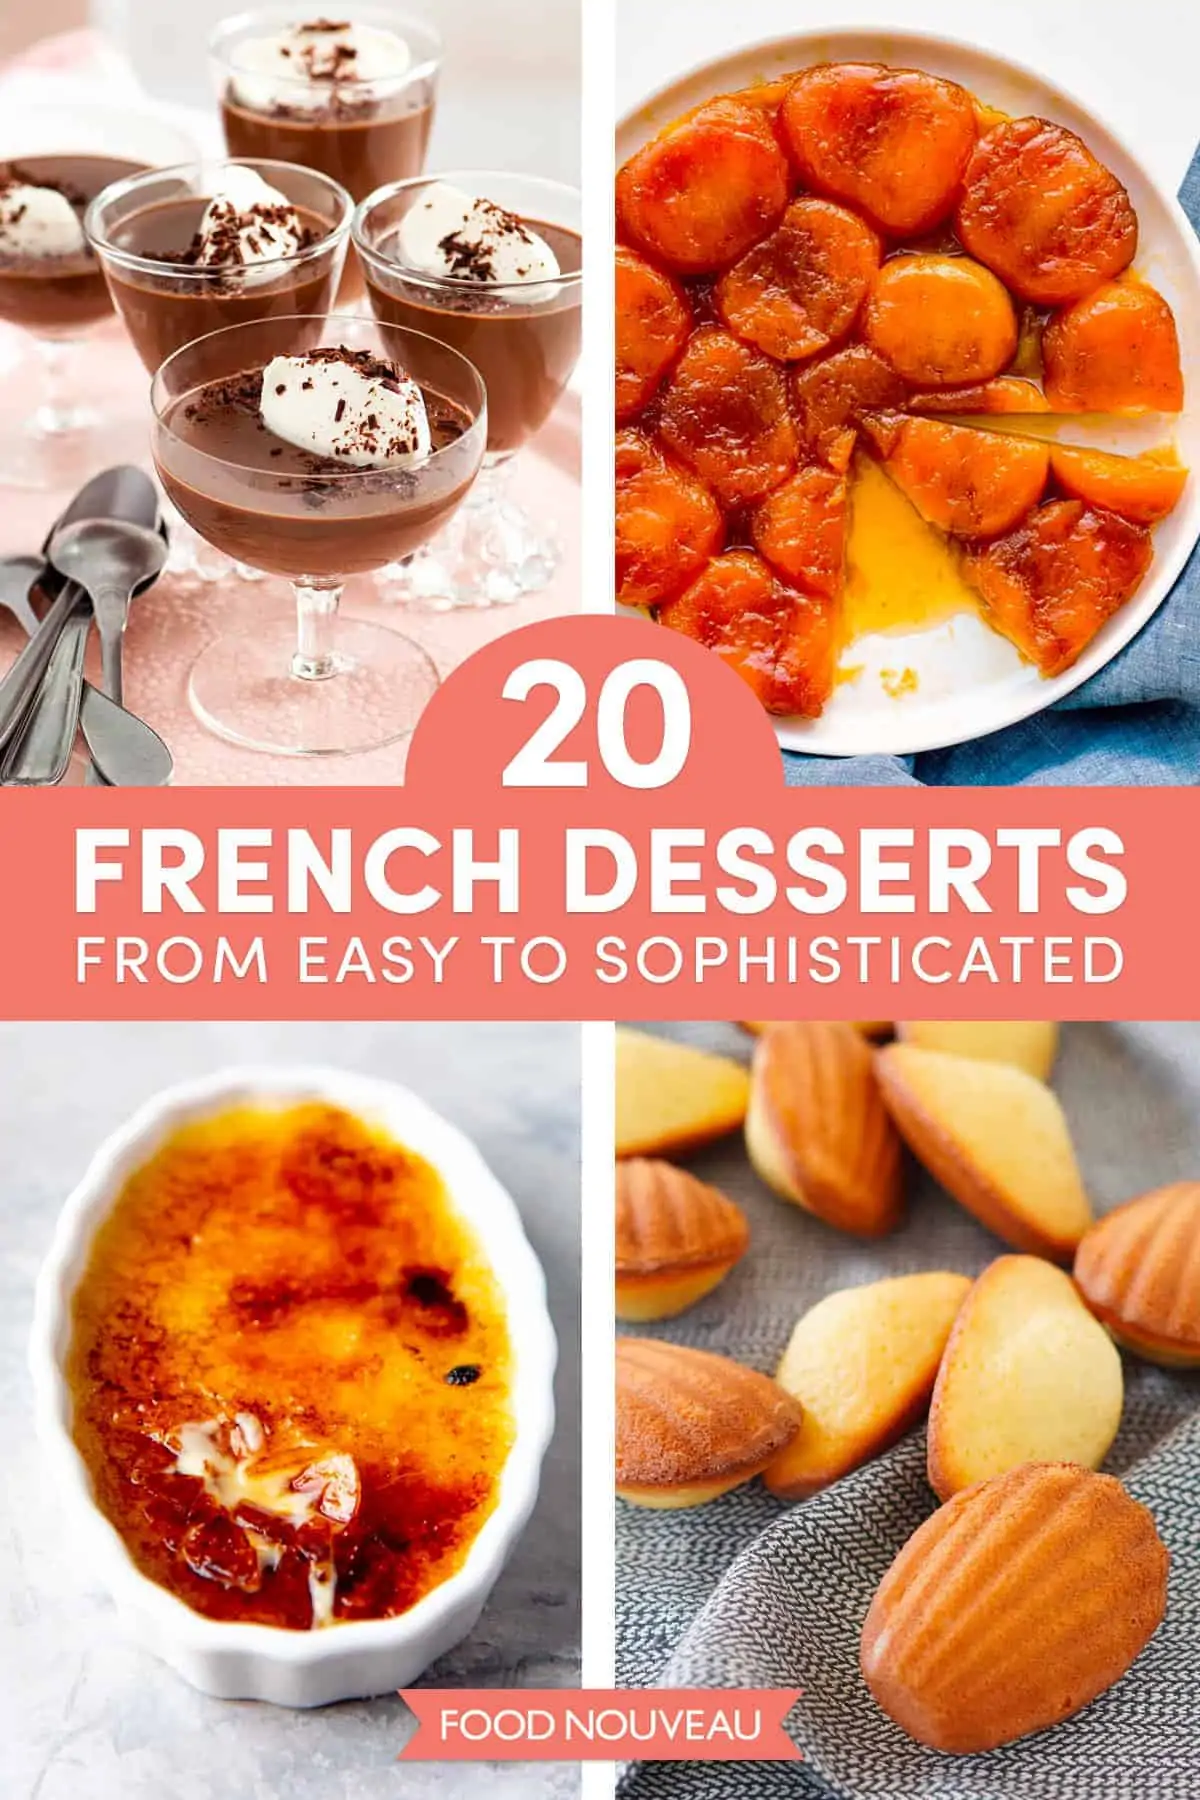 20 Classic French Desserts to Impress, from Easy to Sophisticated // FoodNouveau.com